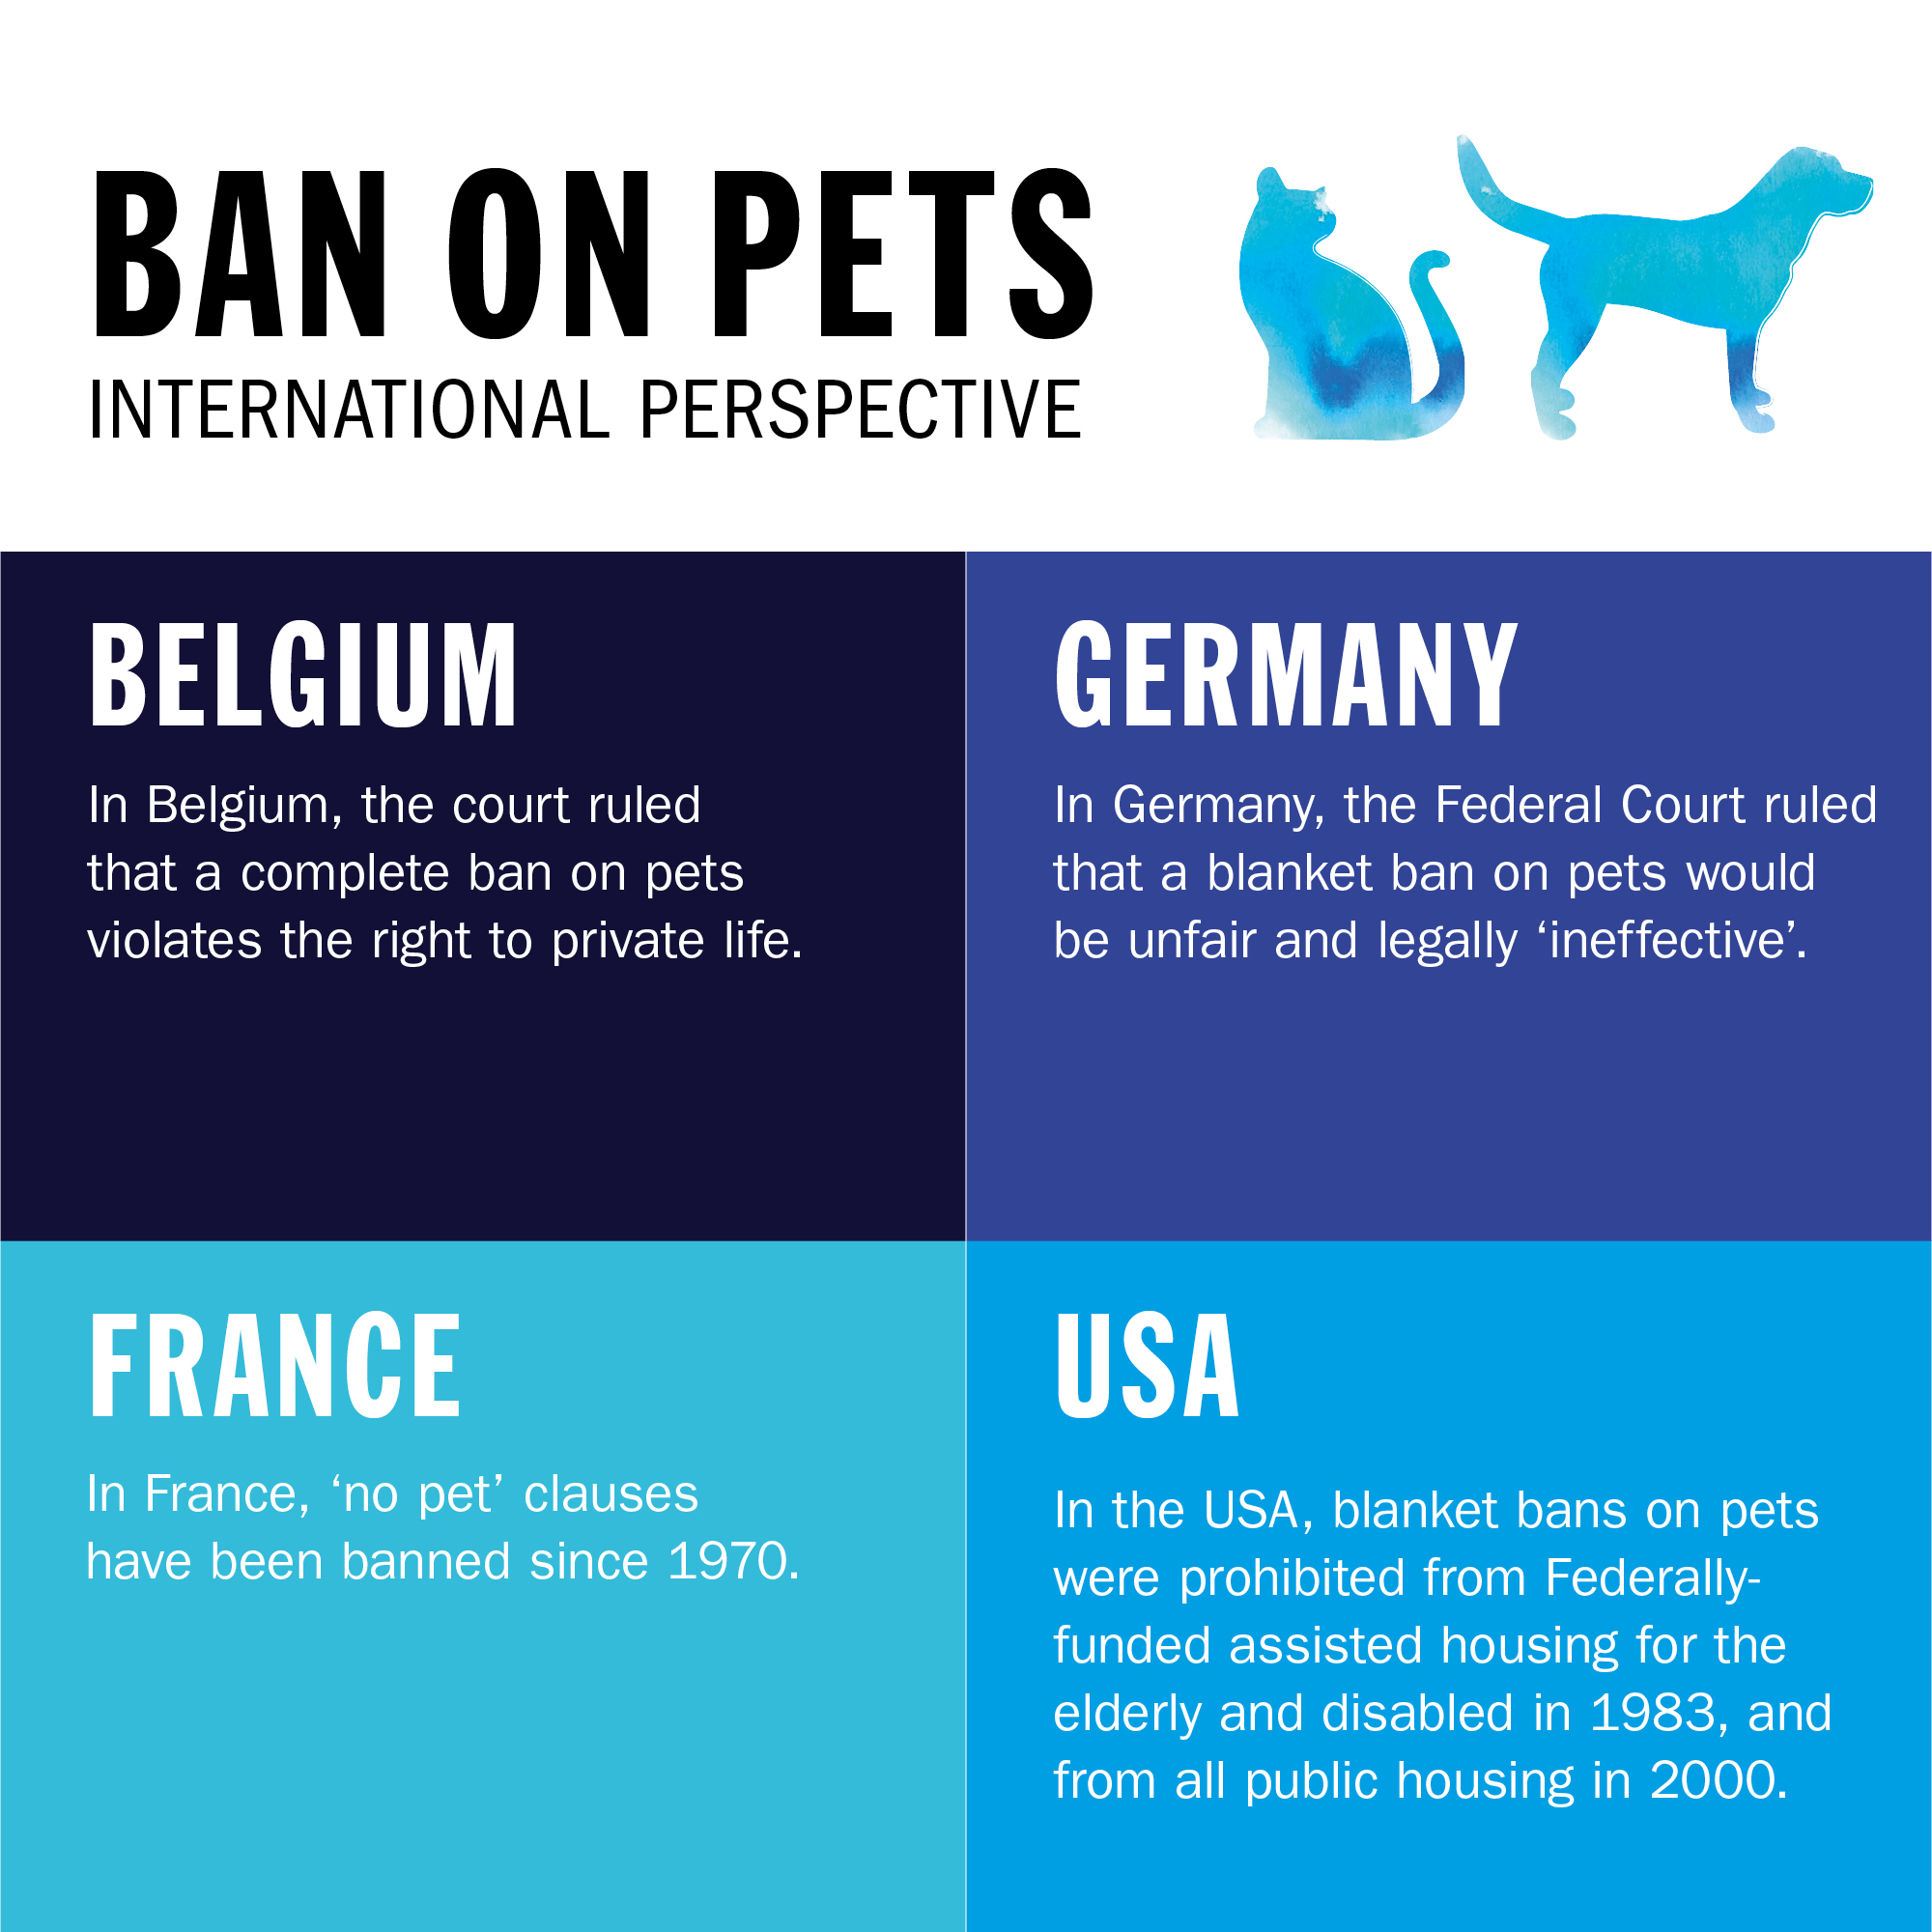 Ban on pets international perspective infographic